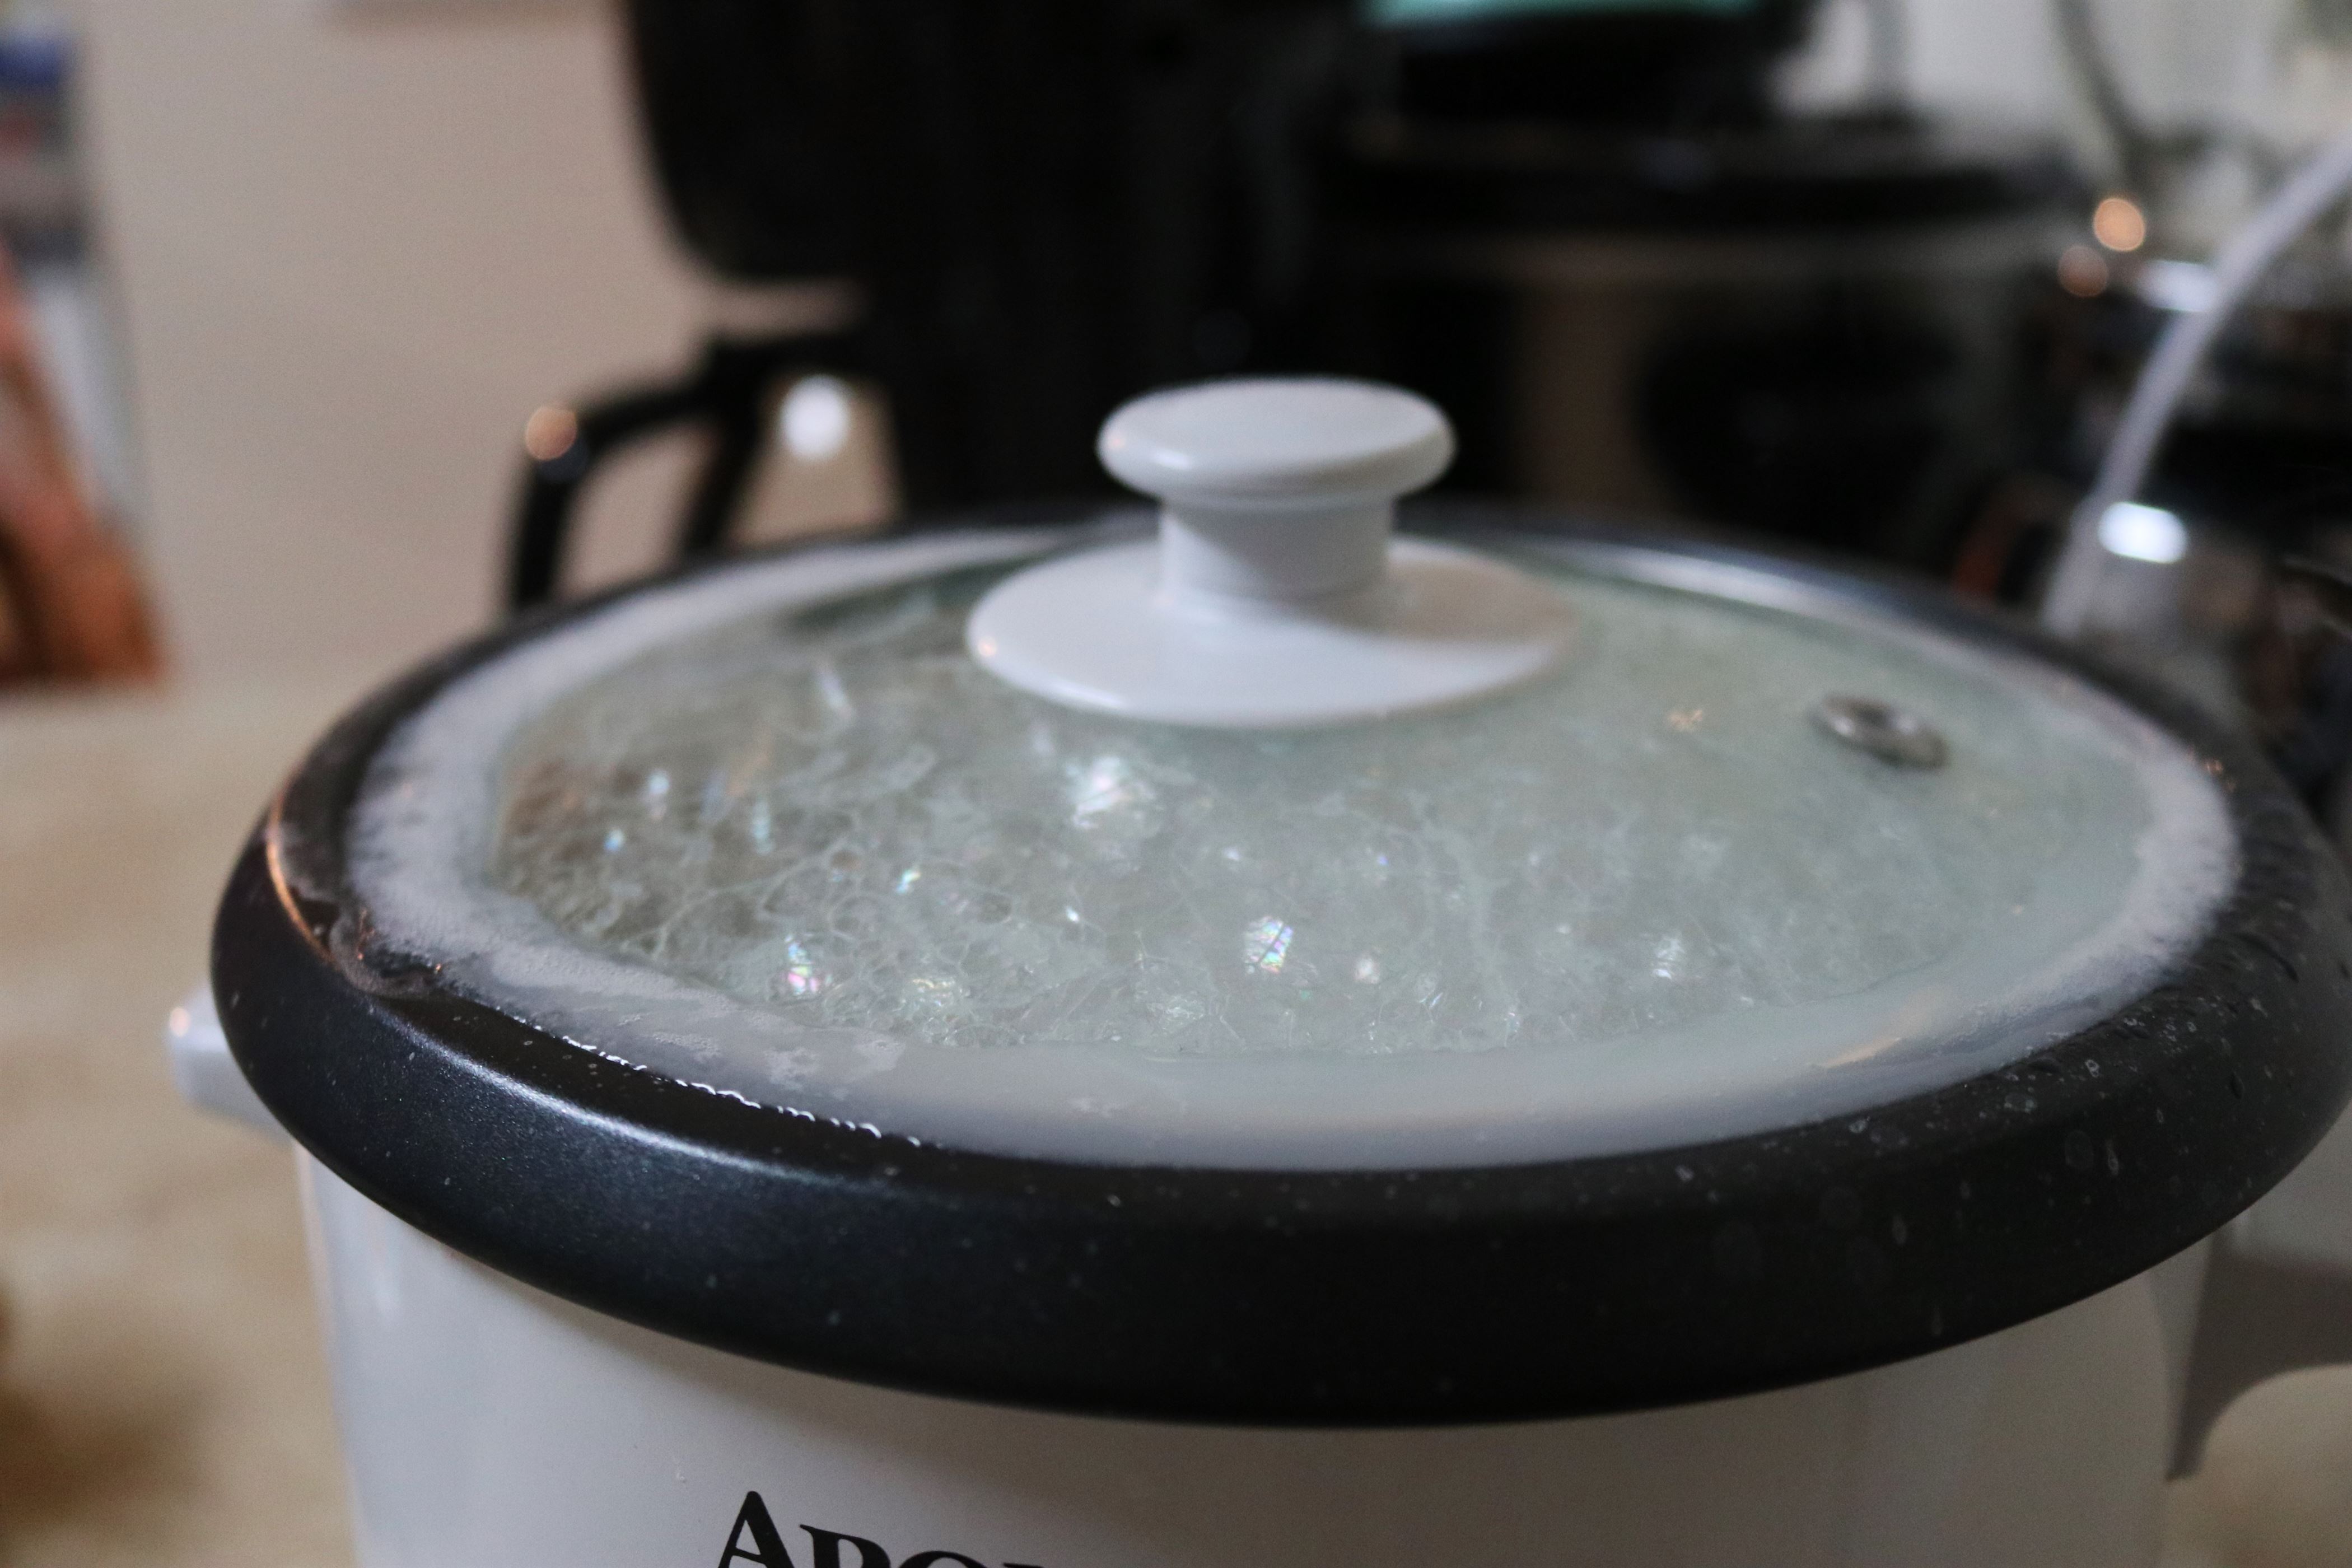 Yes, the water will bubble a bit! Don't freak out, the rice cooker won't explode. (Hopefully.)